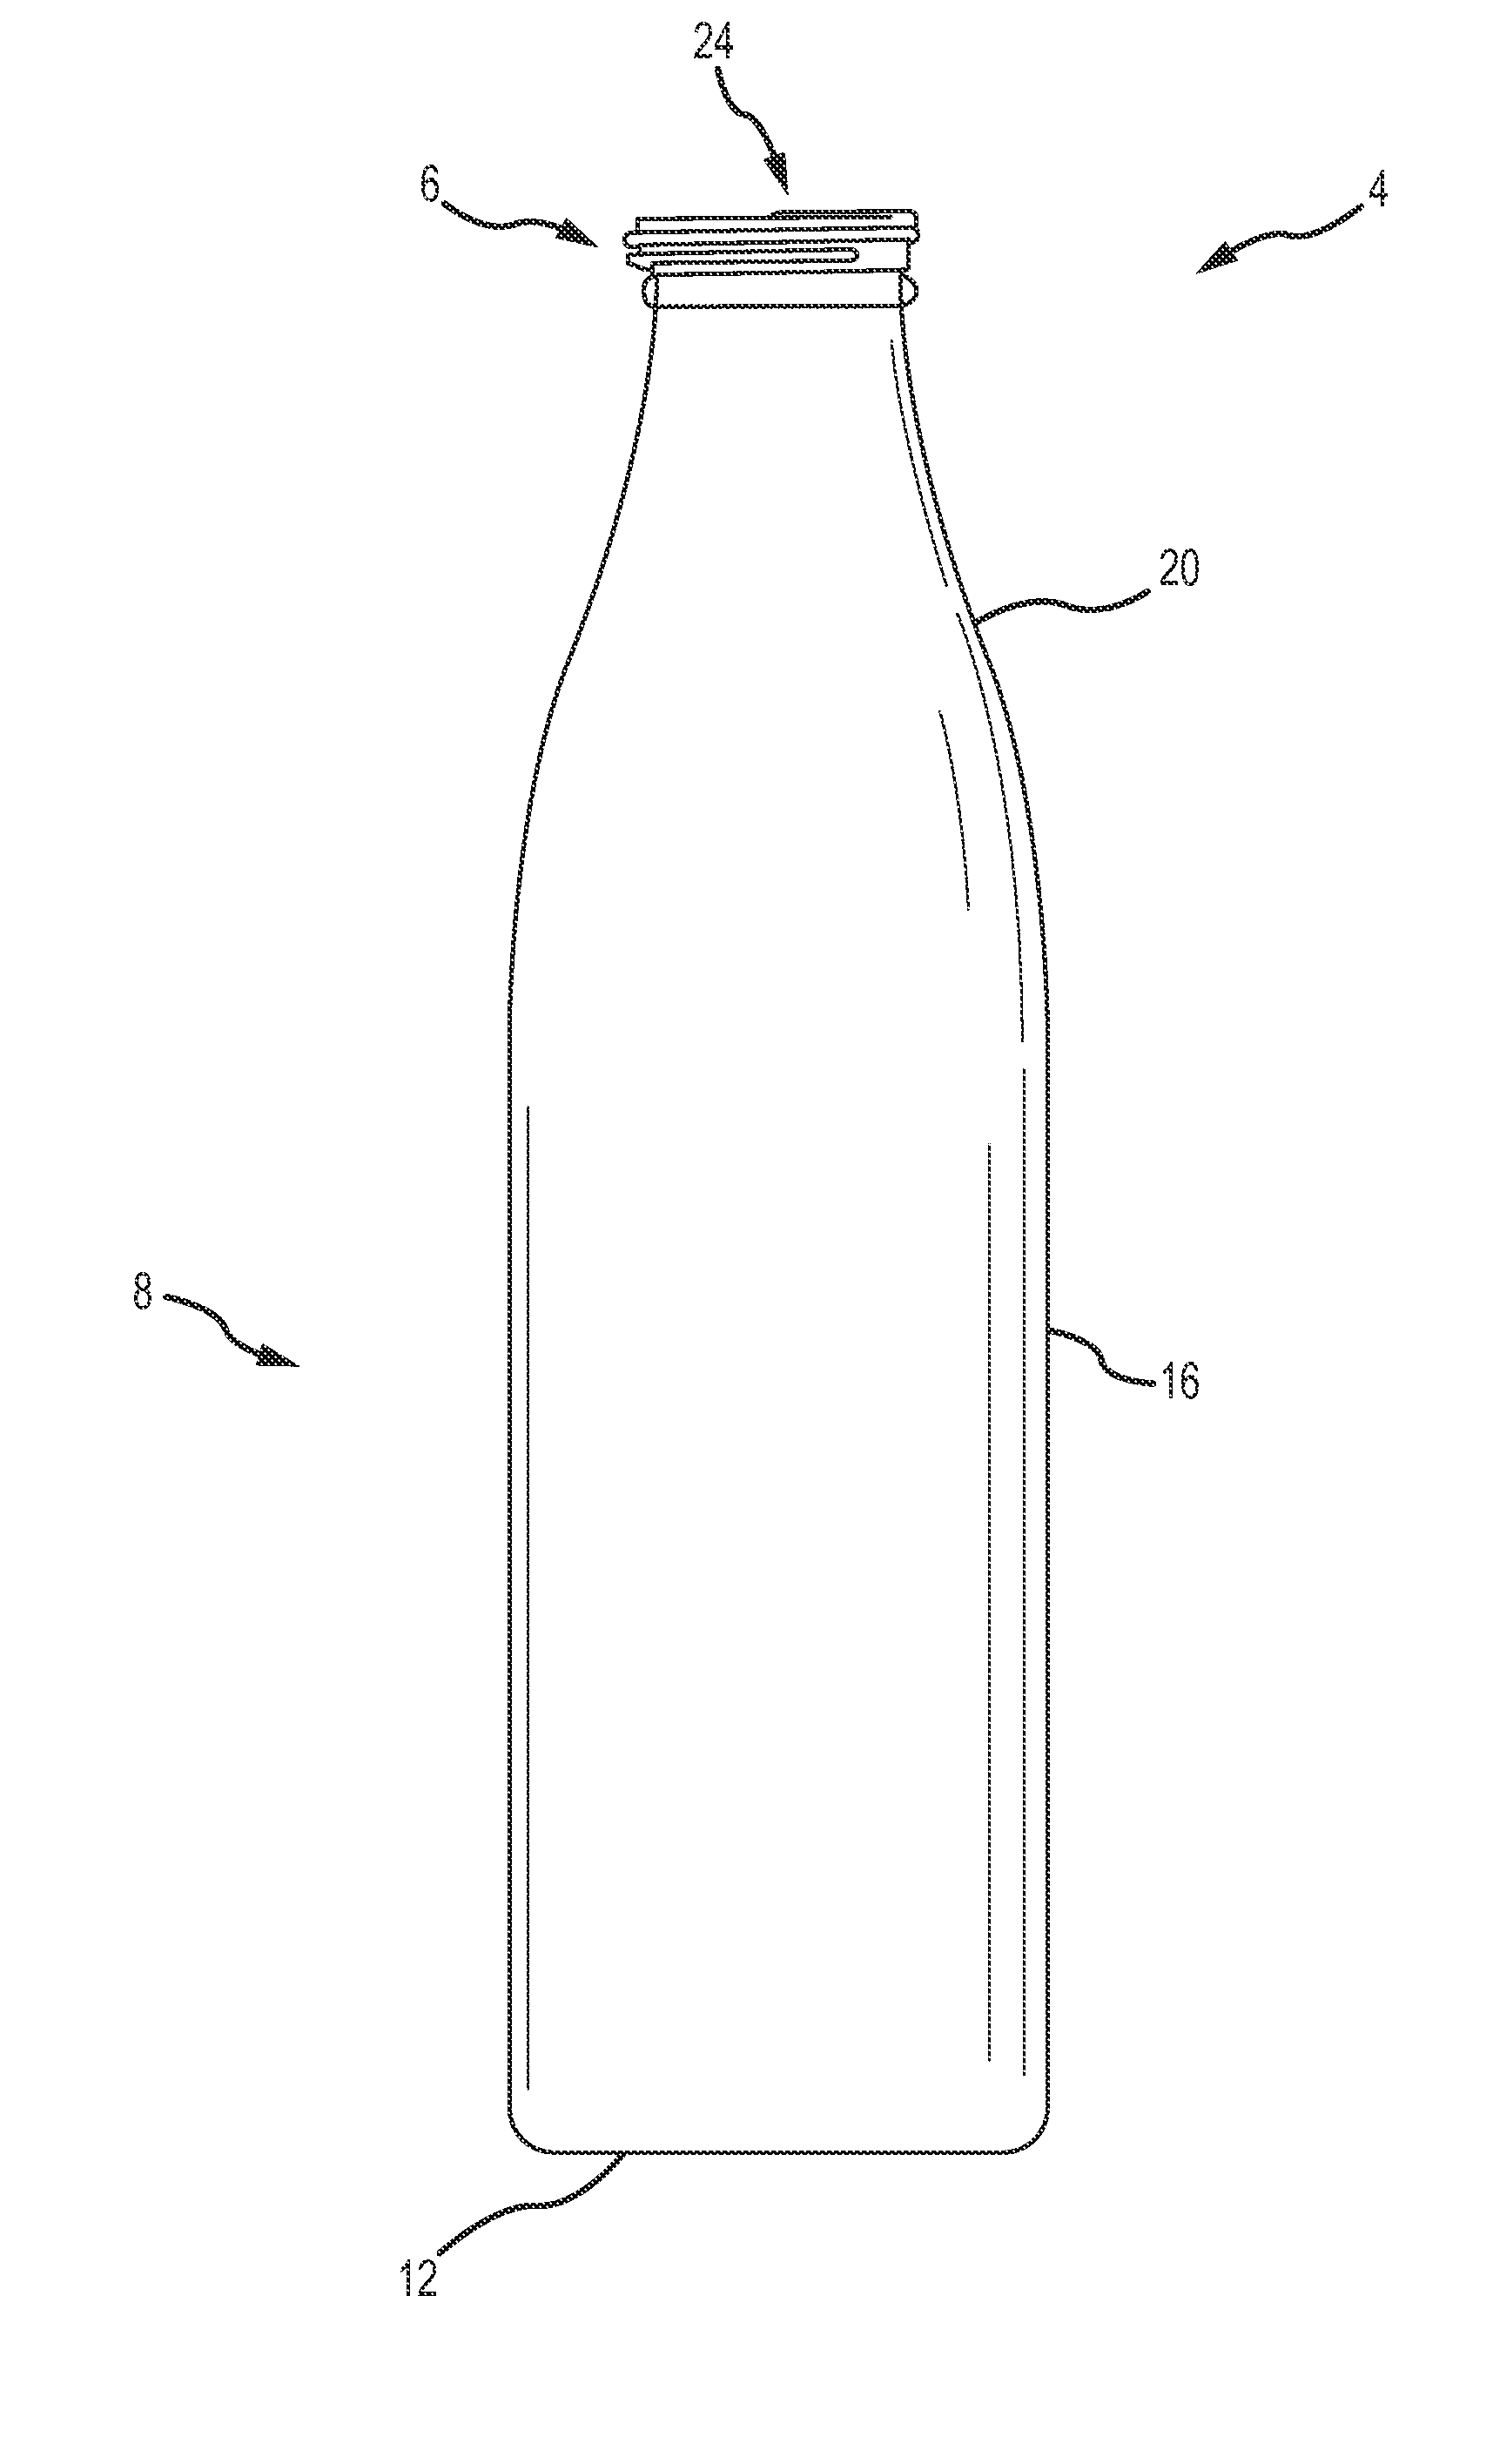 Method and apparatus for forming a threaded neck on a metallic bottle